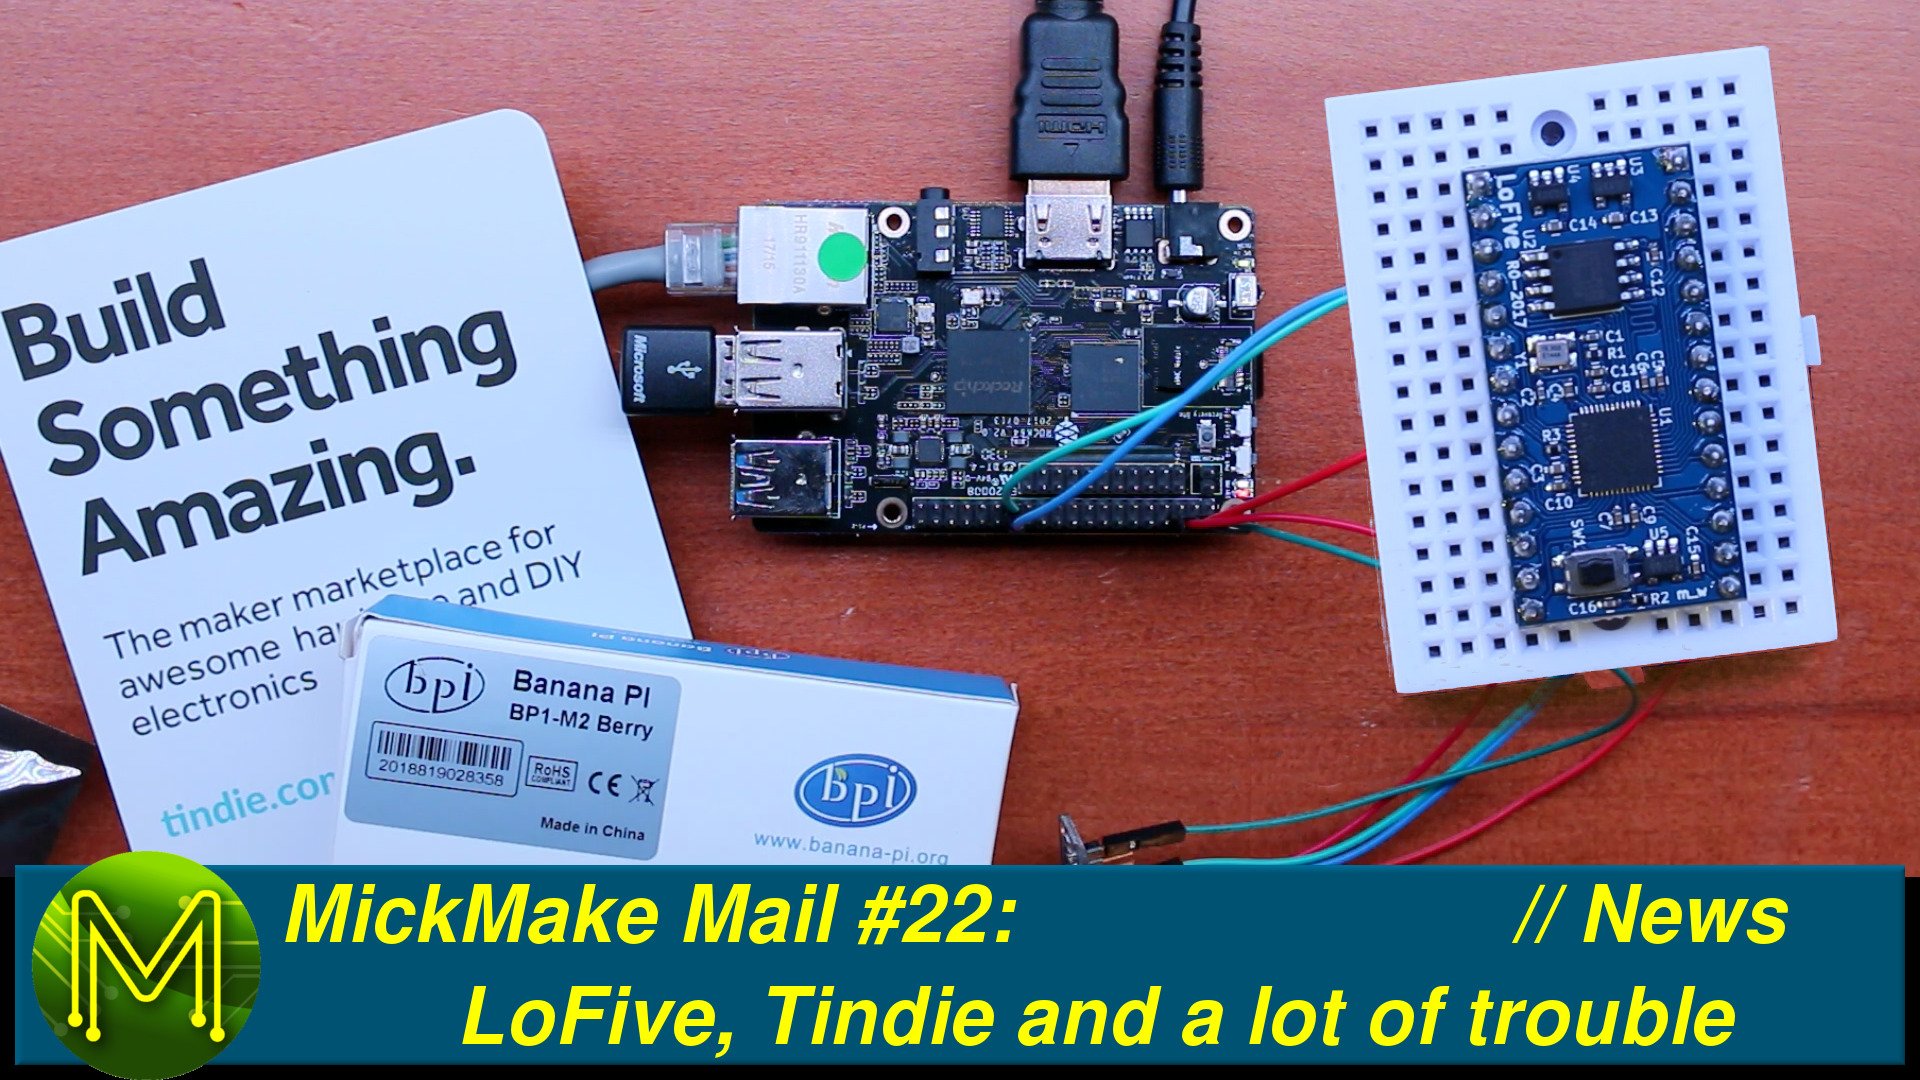 MickMake Mail #22: LoFive, Tindie and a lot of trouble // News